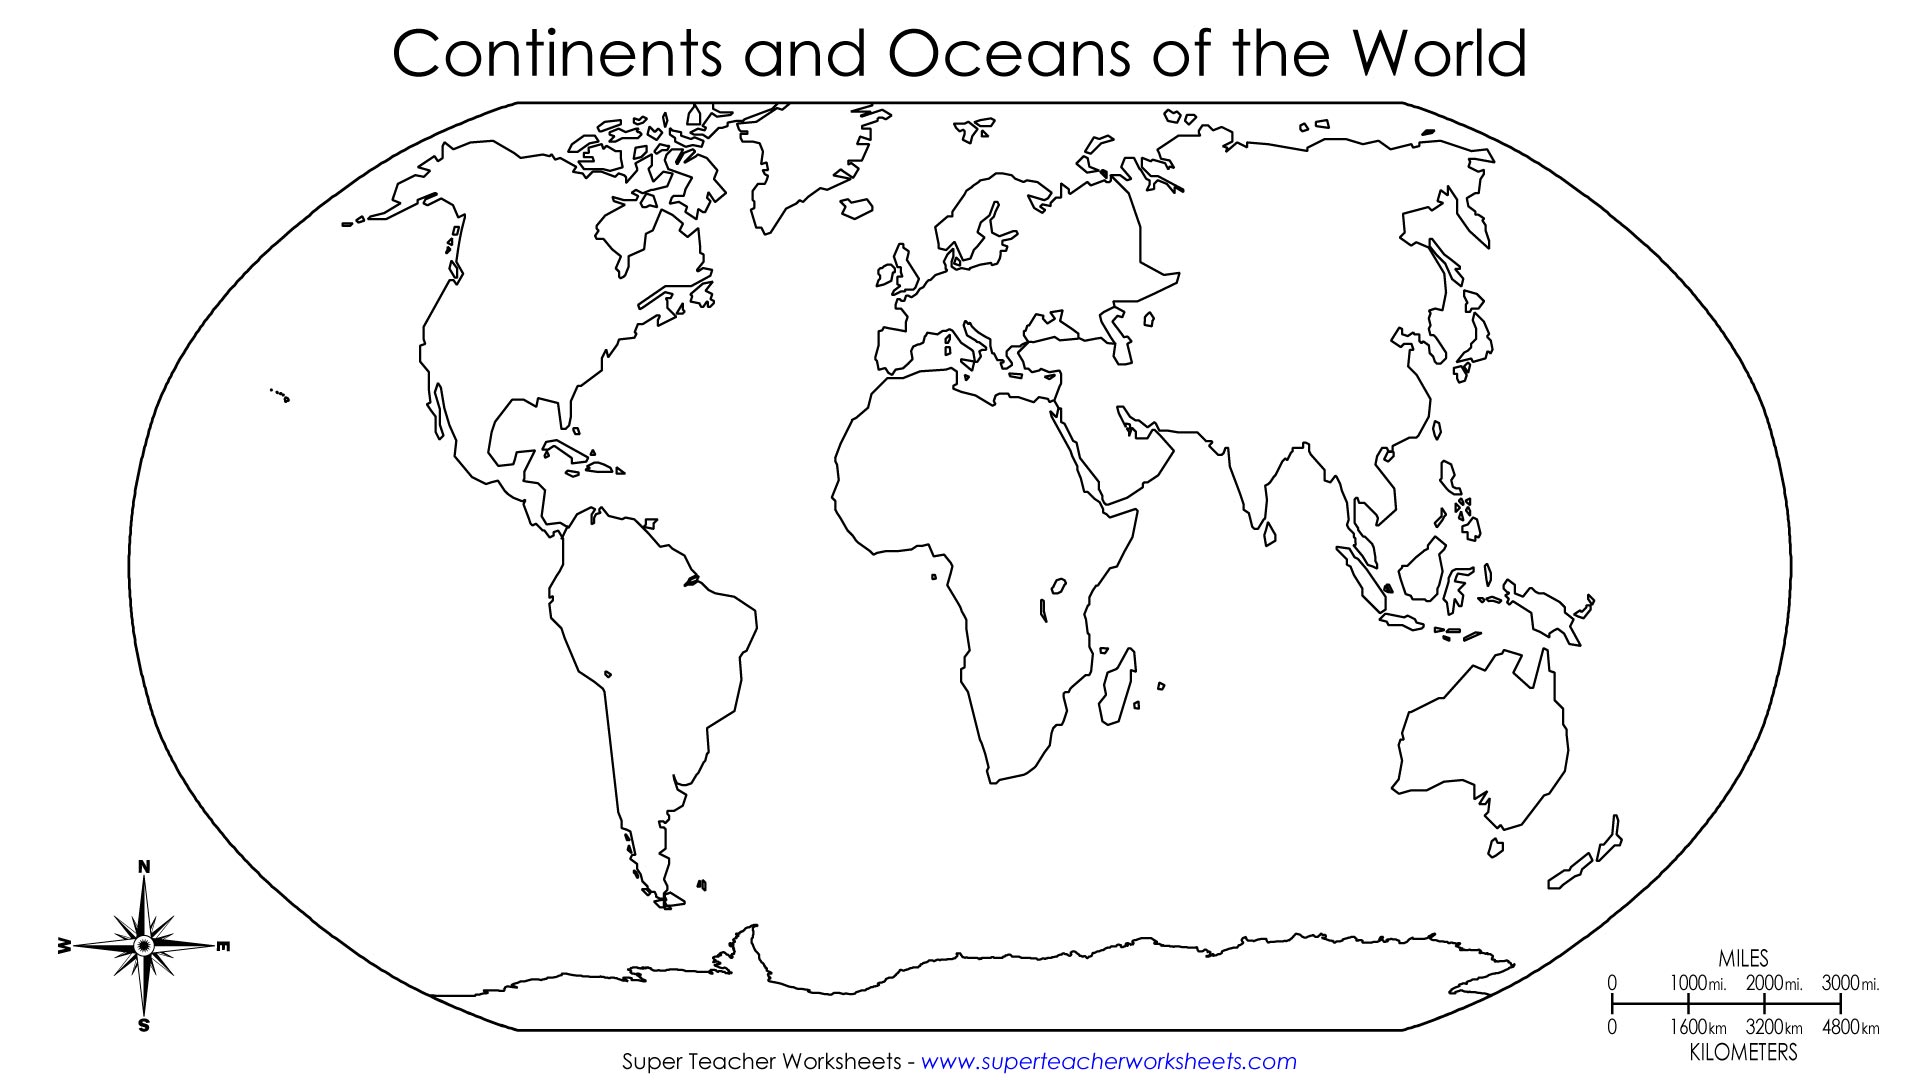 This basic world map shows the seven continents and four oceans.